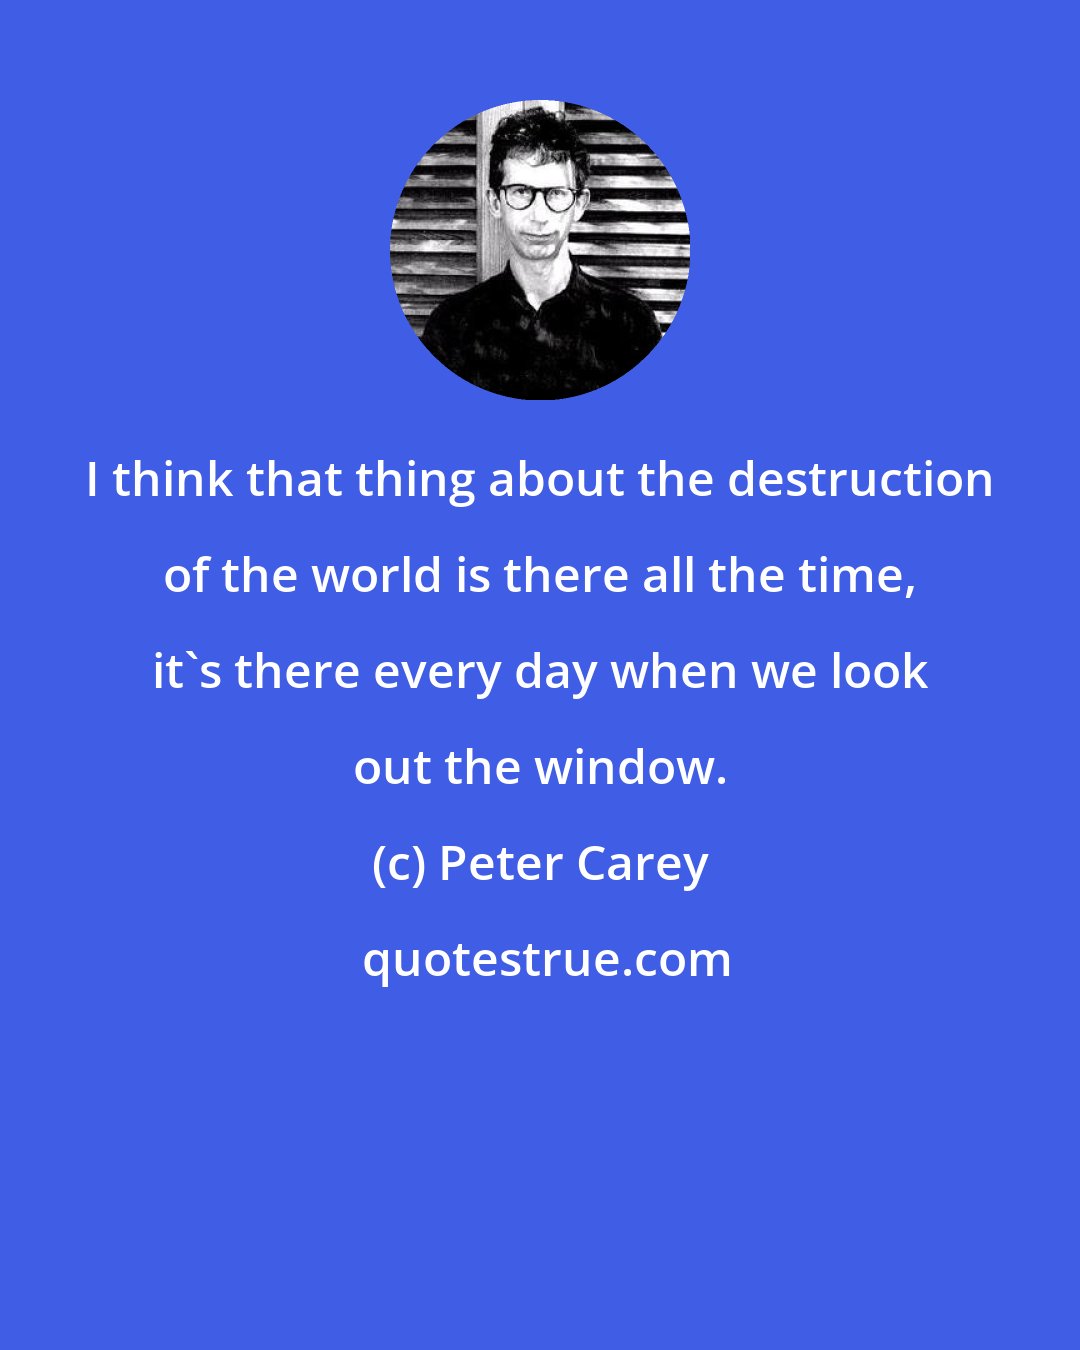 Peter Carey: I think that thing about the destruction of the world is there all the time, it's there every day when we look out the window.